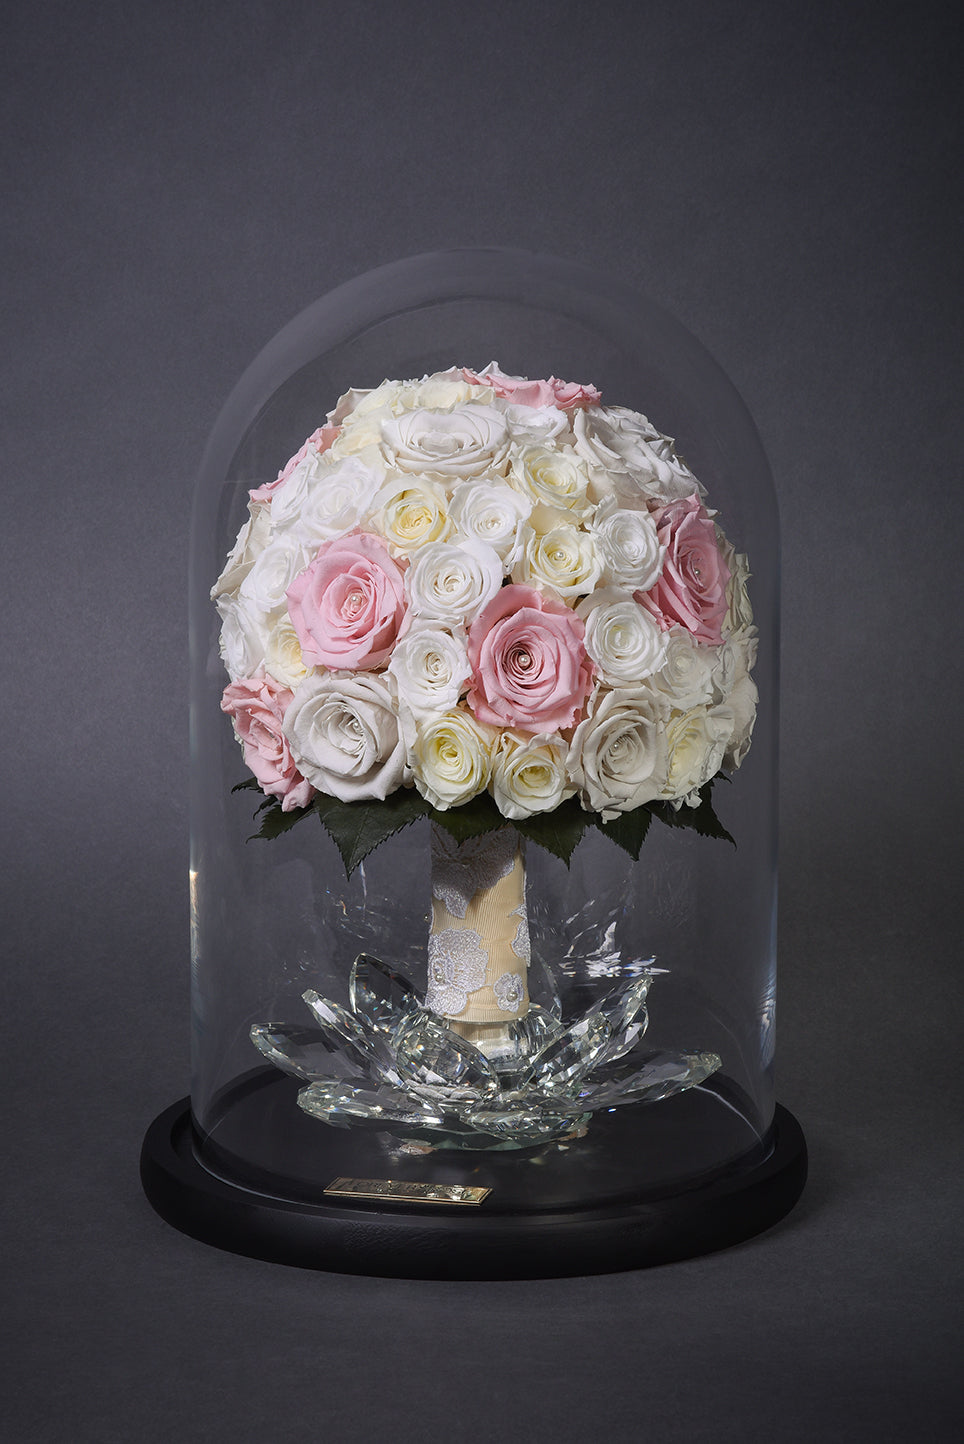 The Bridal Bouquet in Dome